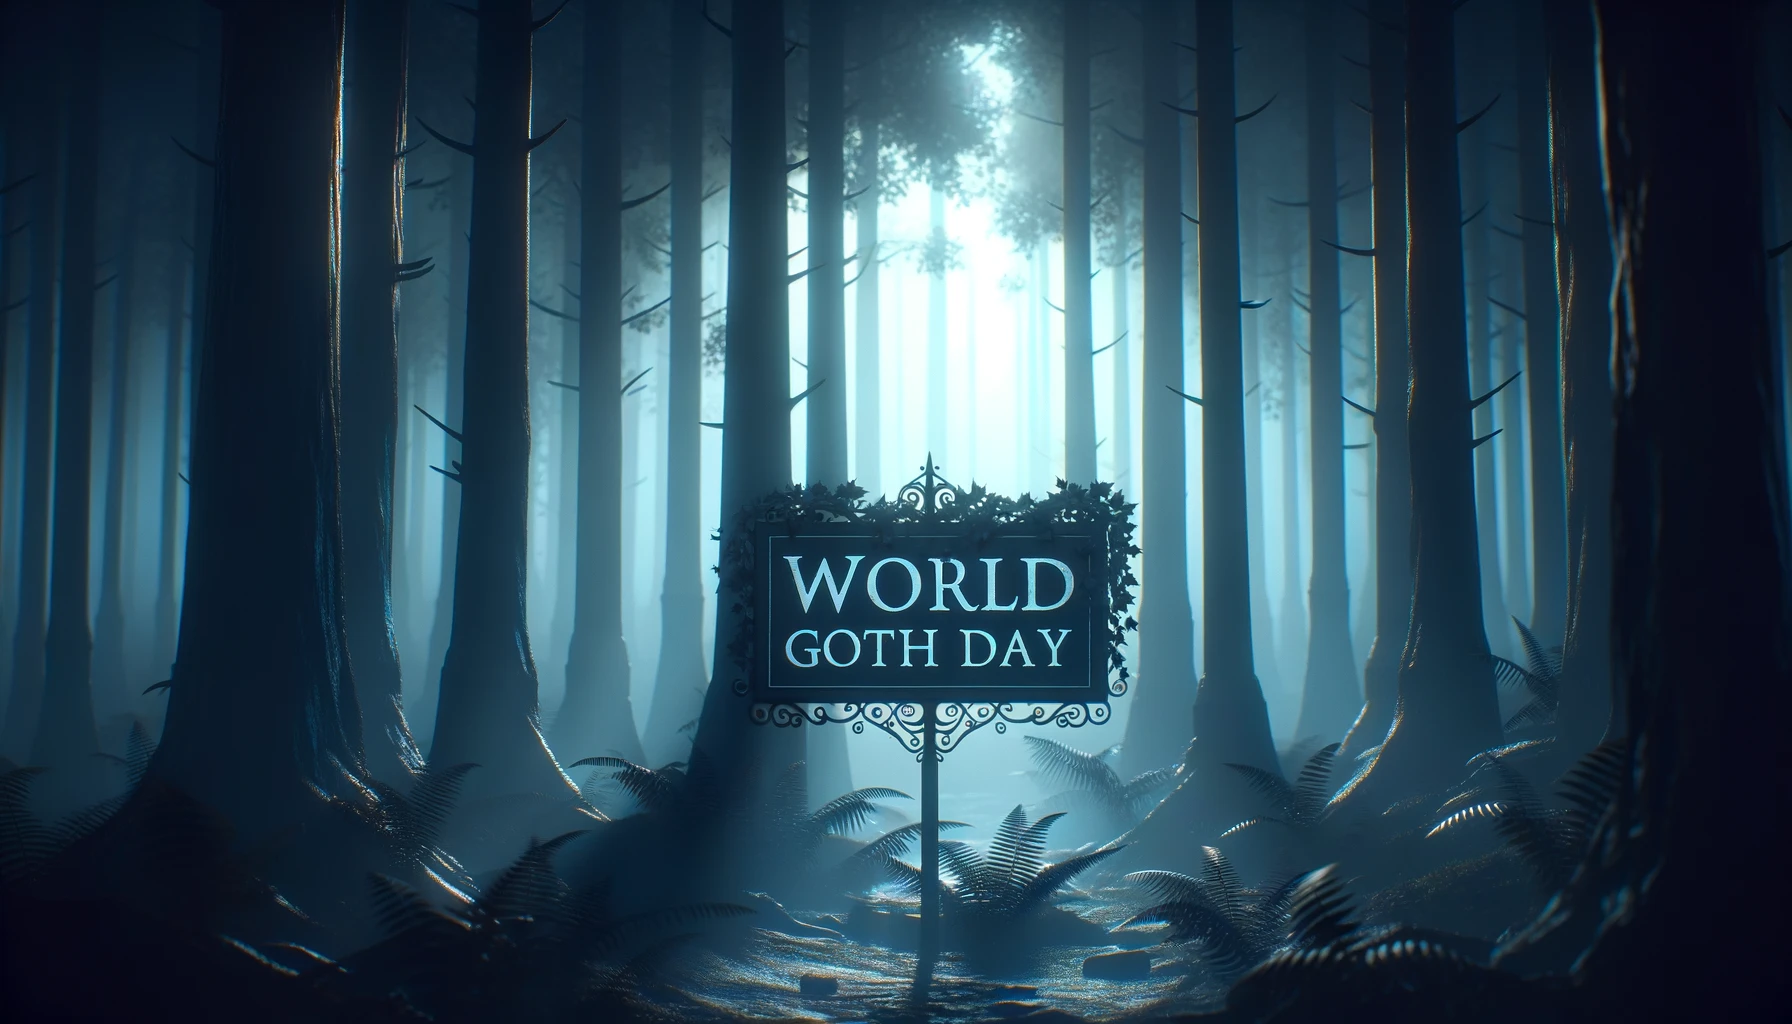 Deep World Goth Day Quotes for Inspiration